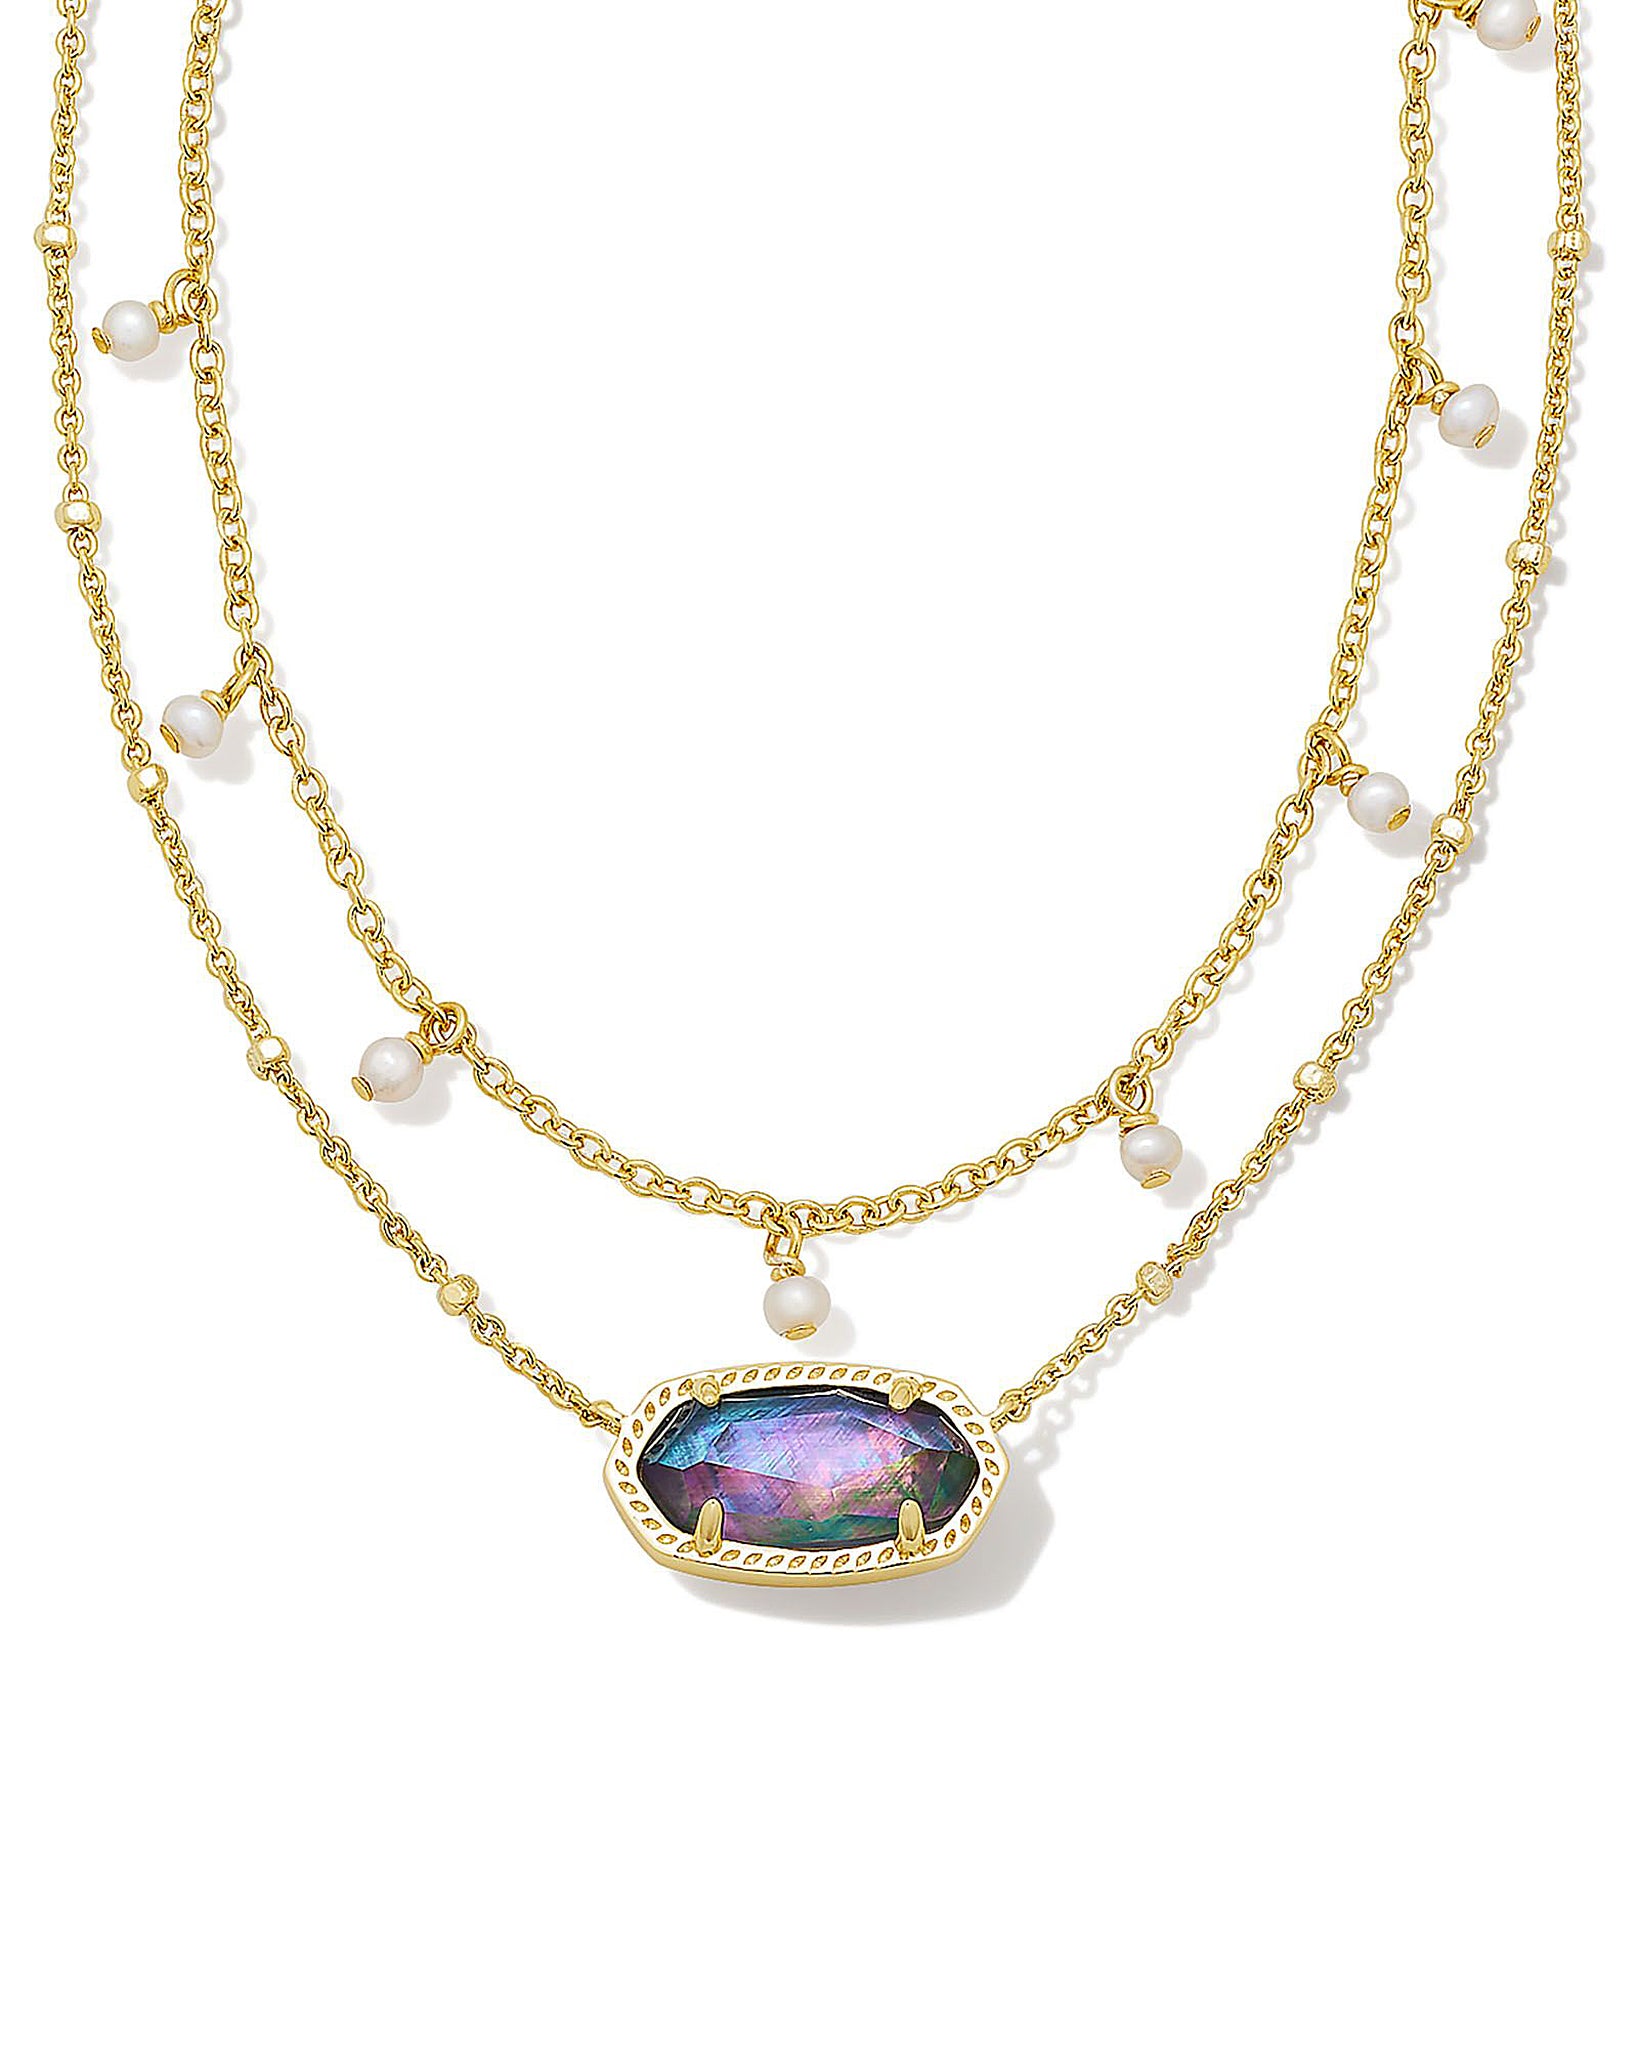 Kendra Scott Elisa Multi Strand Pearl Pendant Necklace in Lilac Abalone and Gold